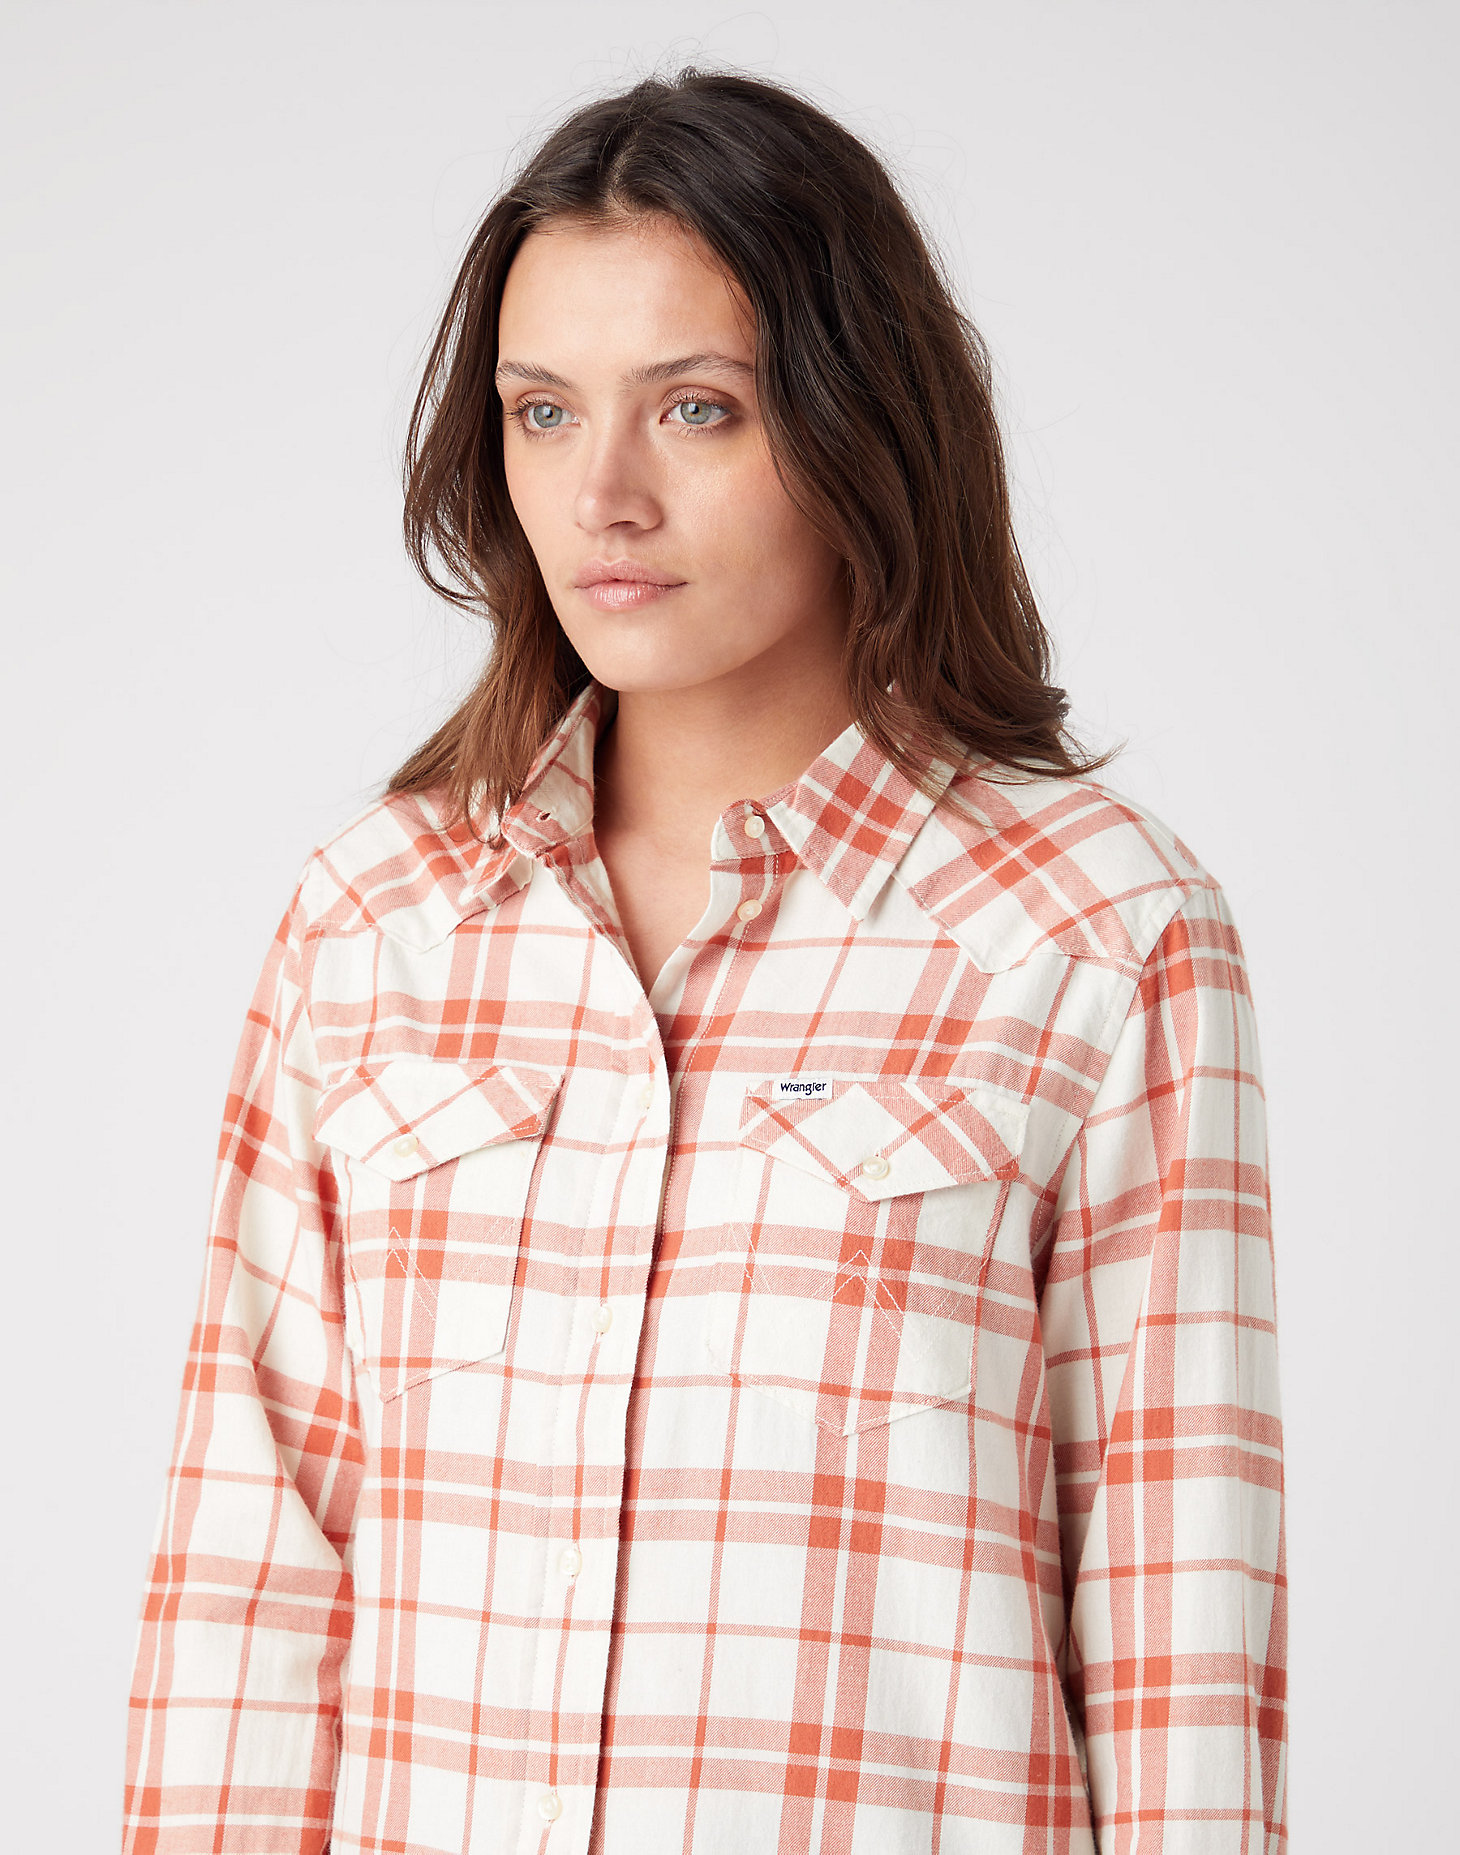 Western Check Shirt in Ginger Spice alternative view 3